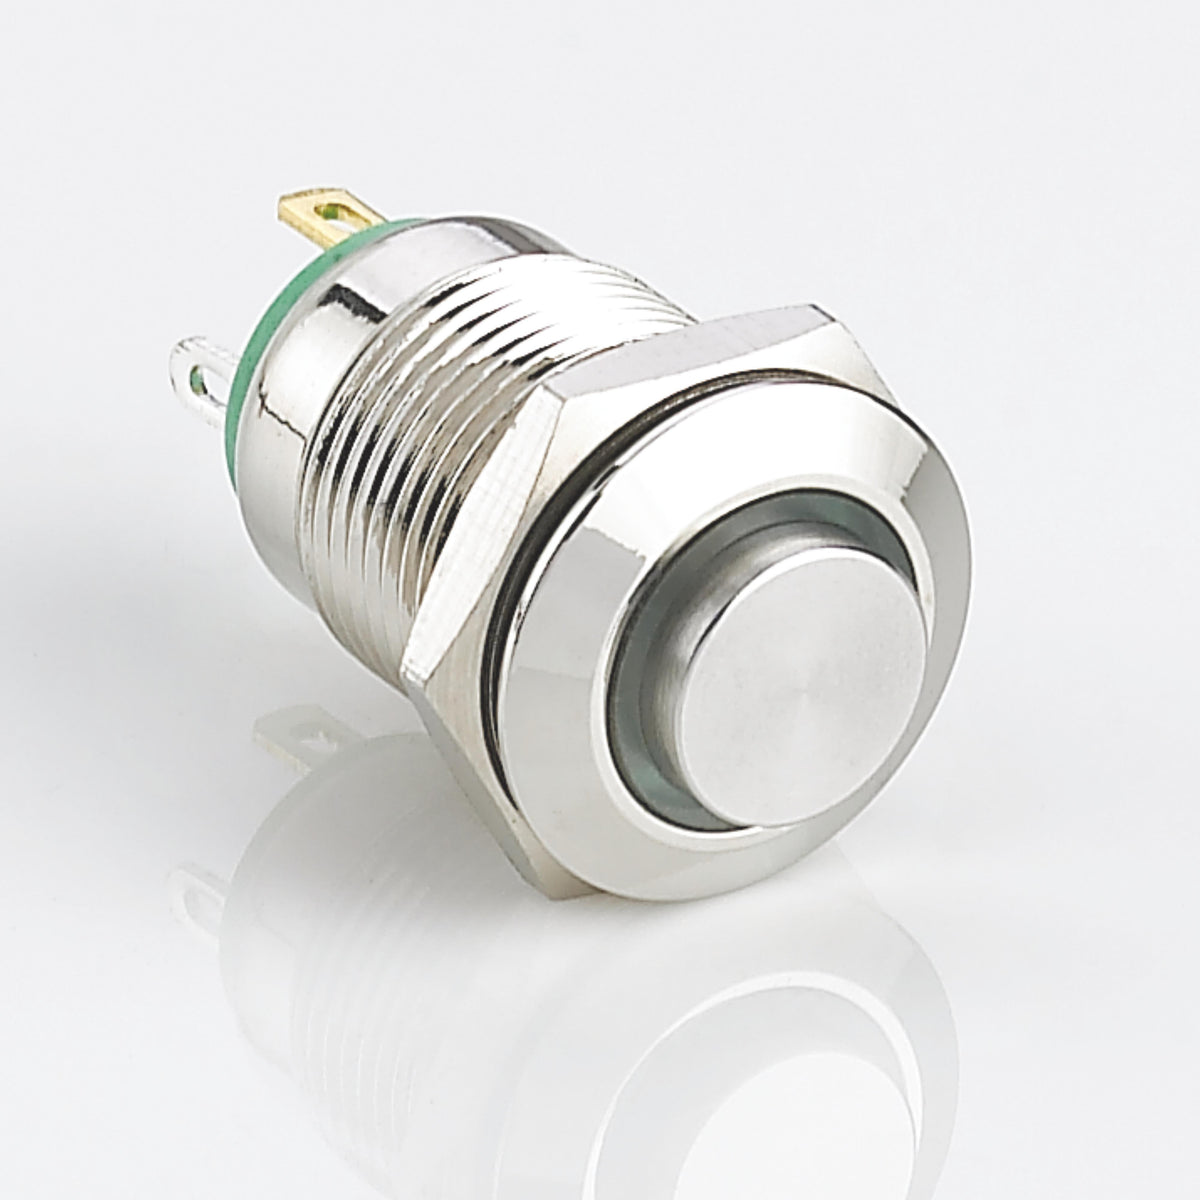 12mm Waterproof Metal Push Button Switch Ring LED Momentary High Head Stainless Steel Soldering Pin 1 Normally-Open